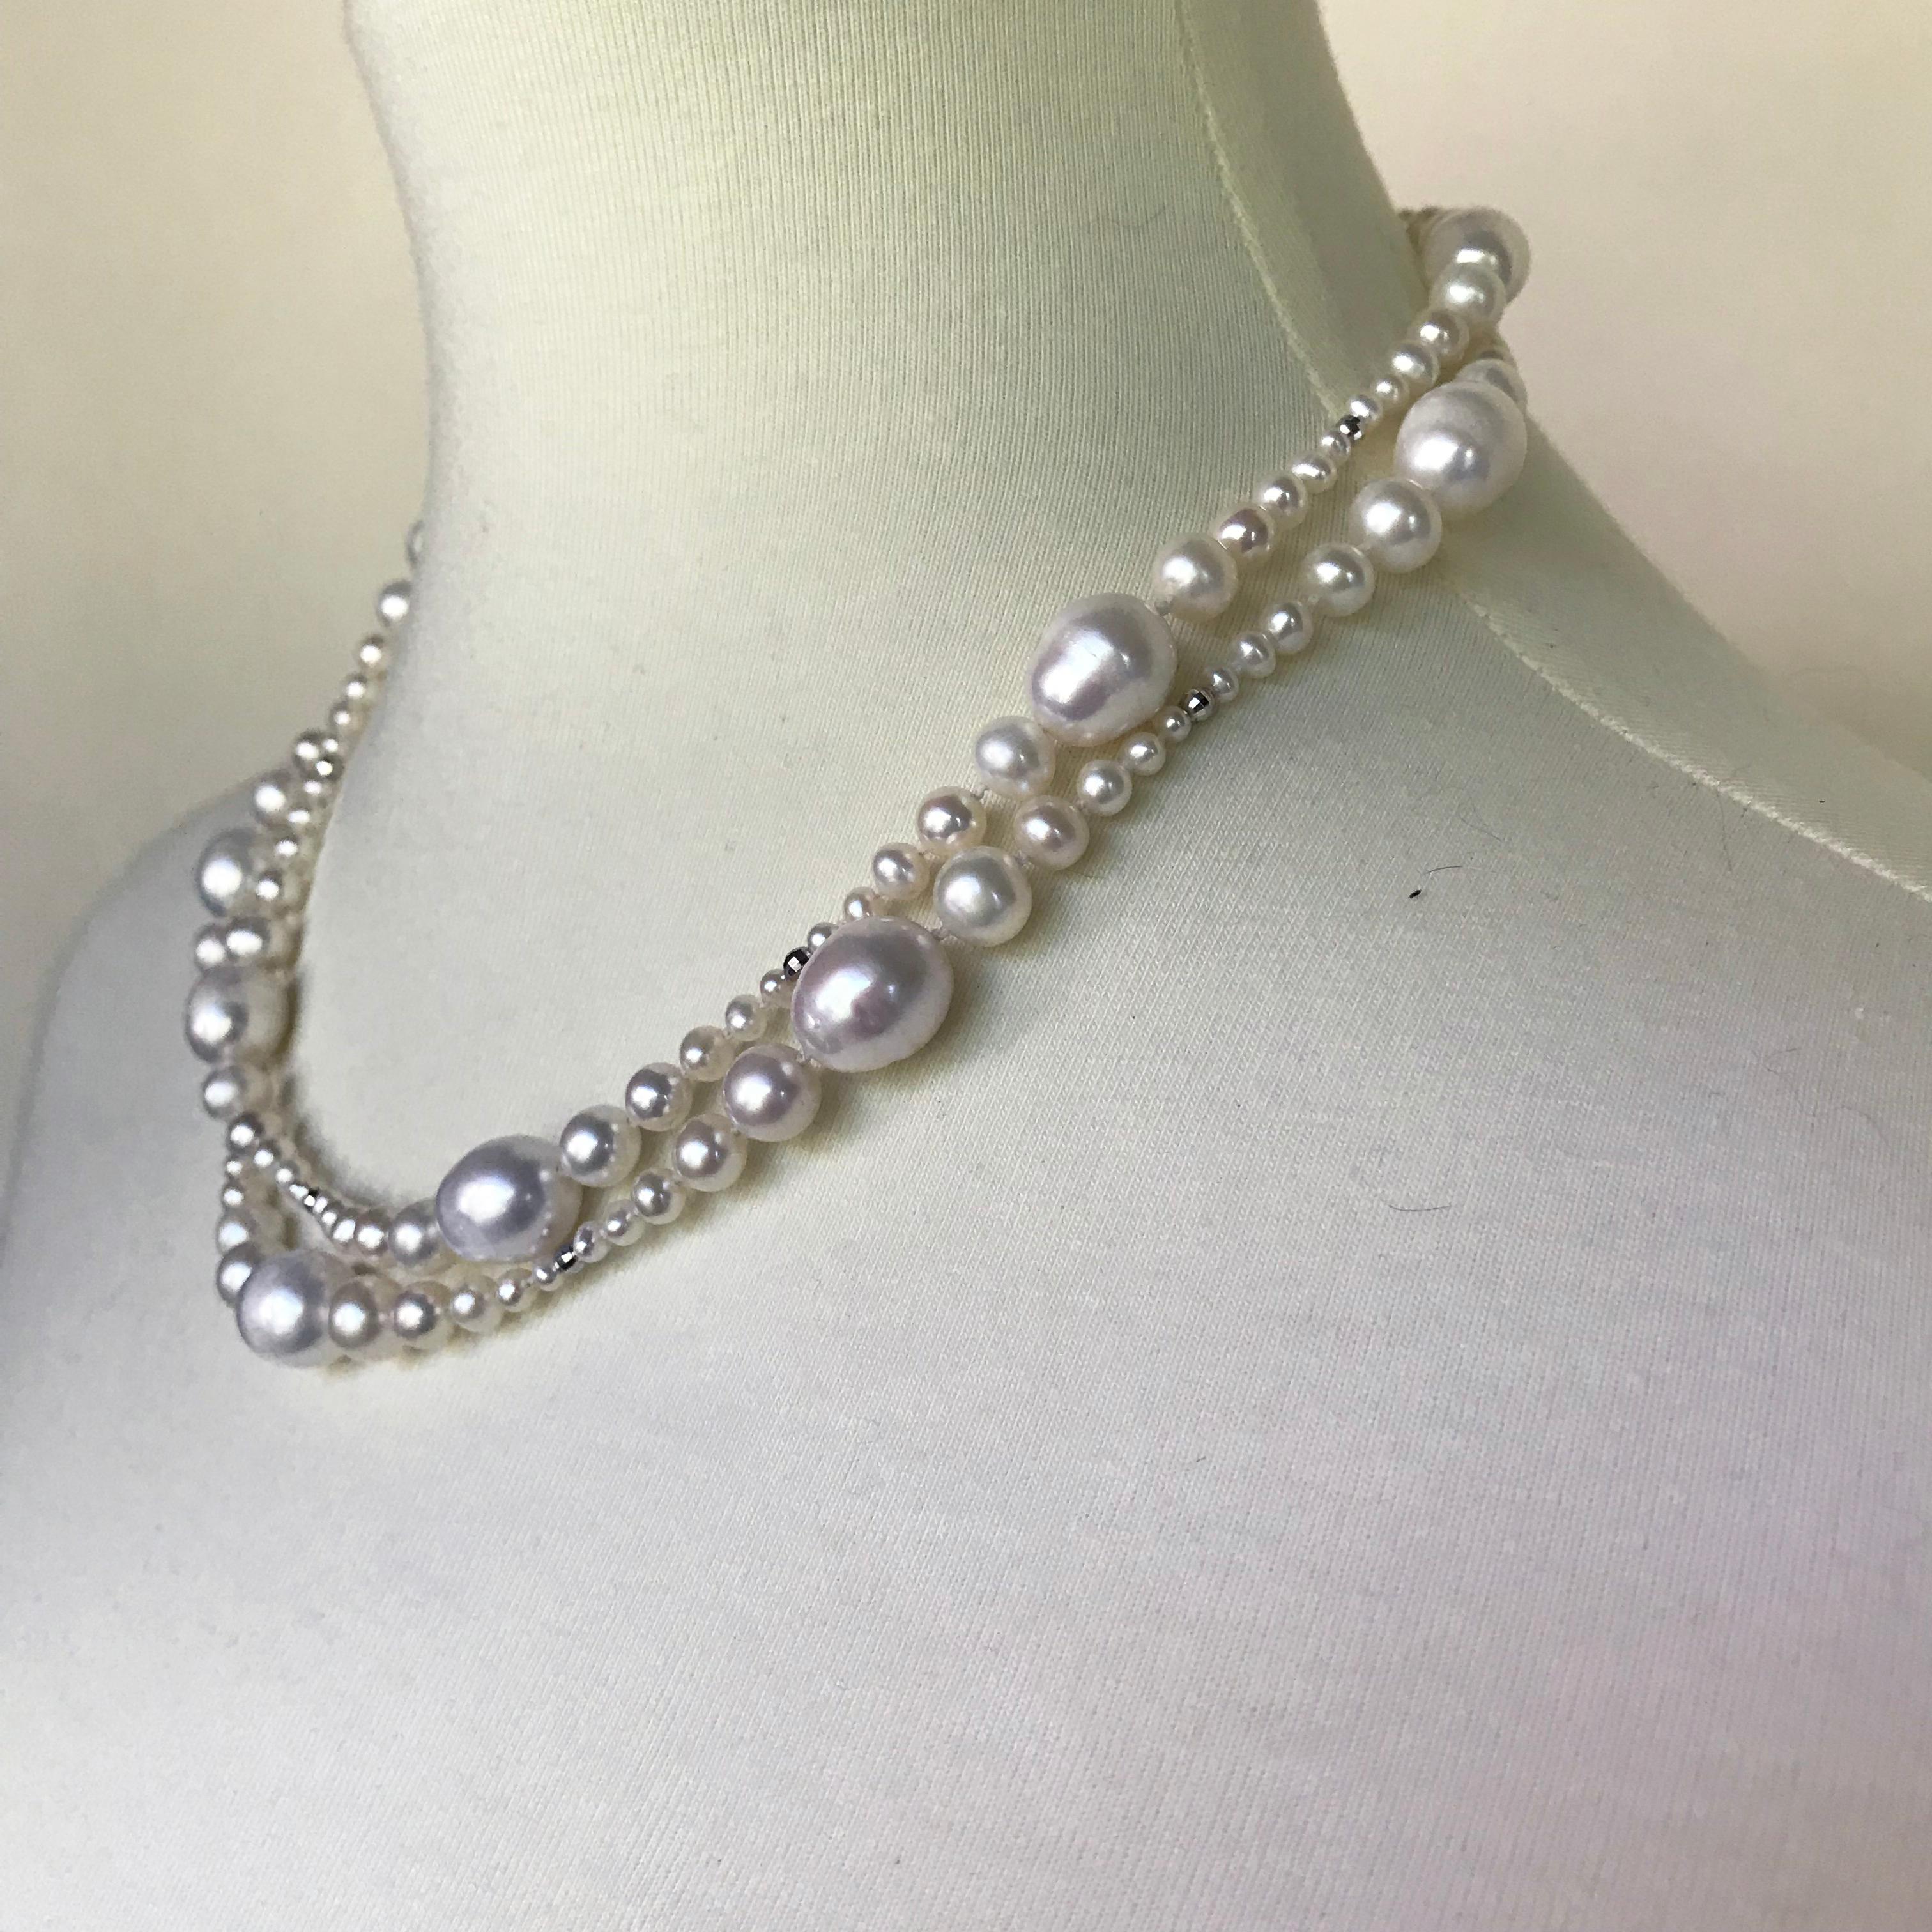 This unique multi-graduated white pearl necklace is composed of a long strand of graduated pearls (2 mm-9 mm) with white gold faceted beads and 14 k white gold clasp. The necklace is 36 inches in length and it allows to wear it in a single or a